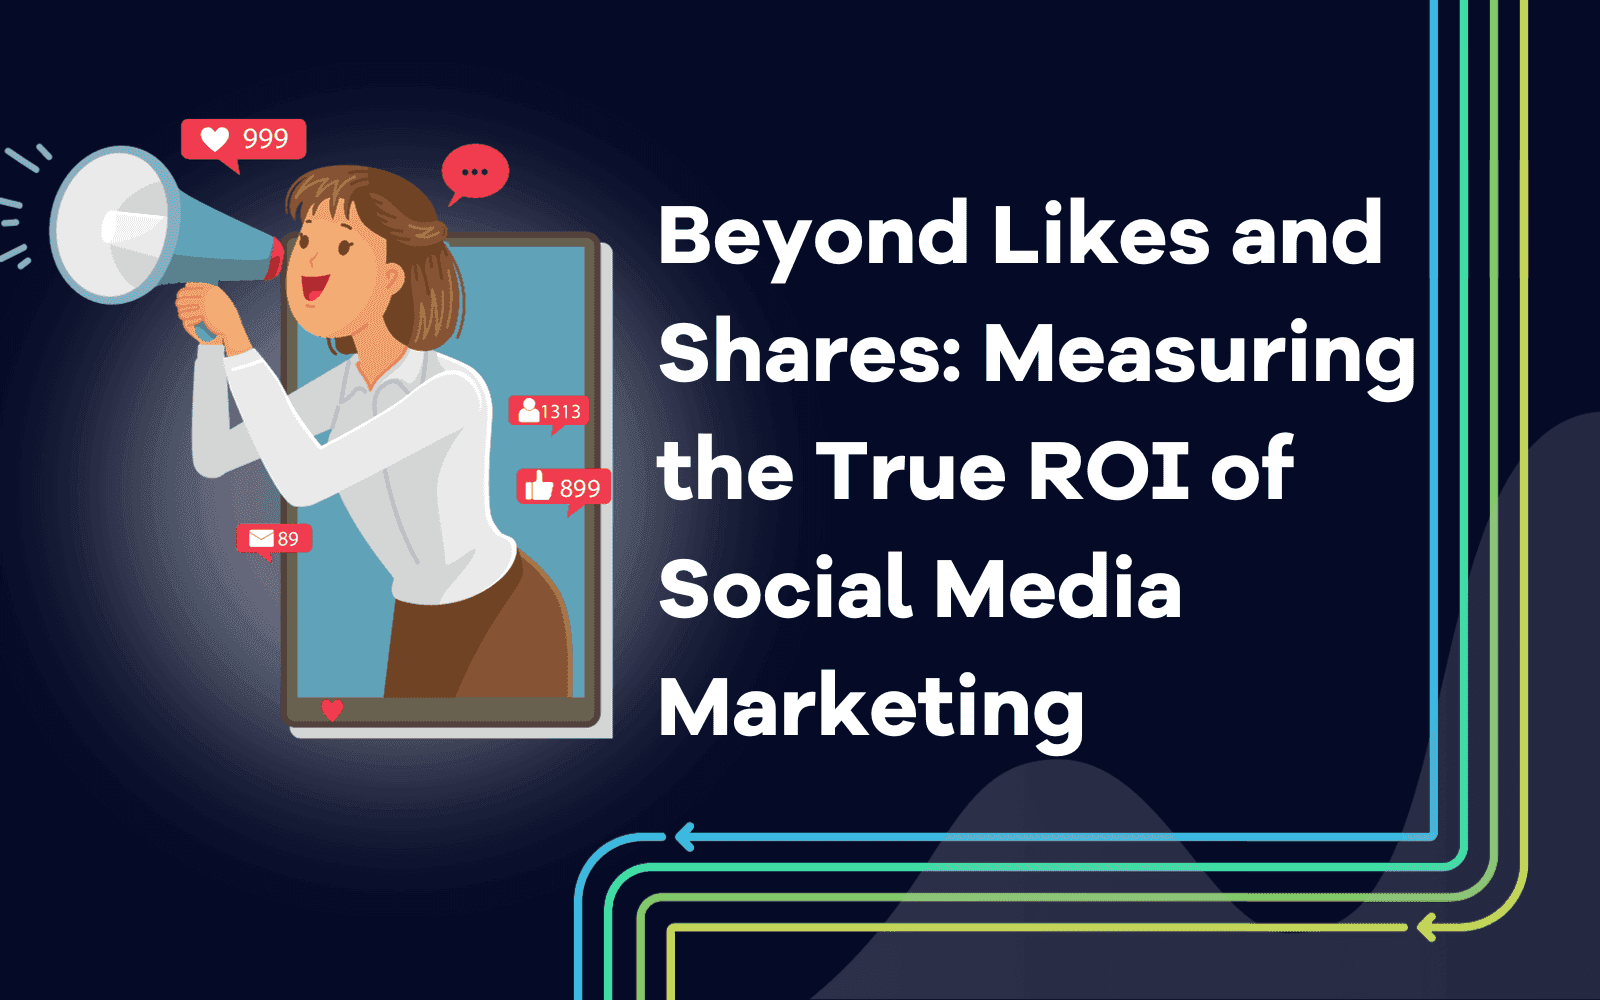 Beyond Likes and Shares Measuring the True ROI of Social Media Marketing